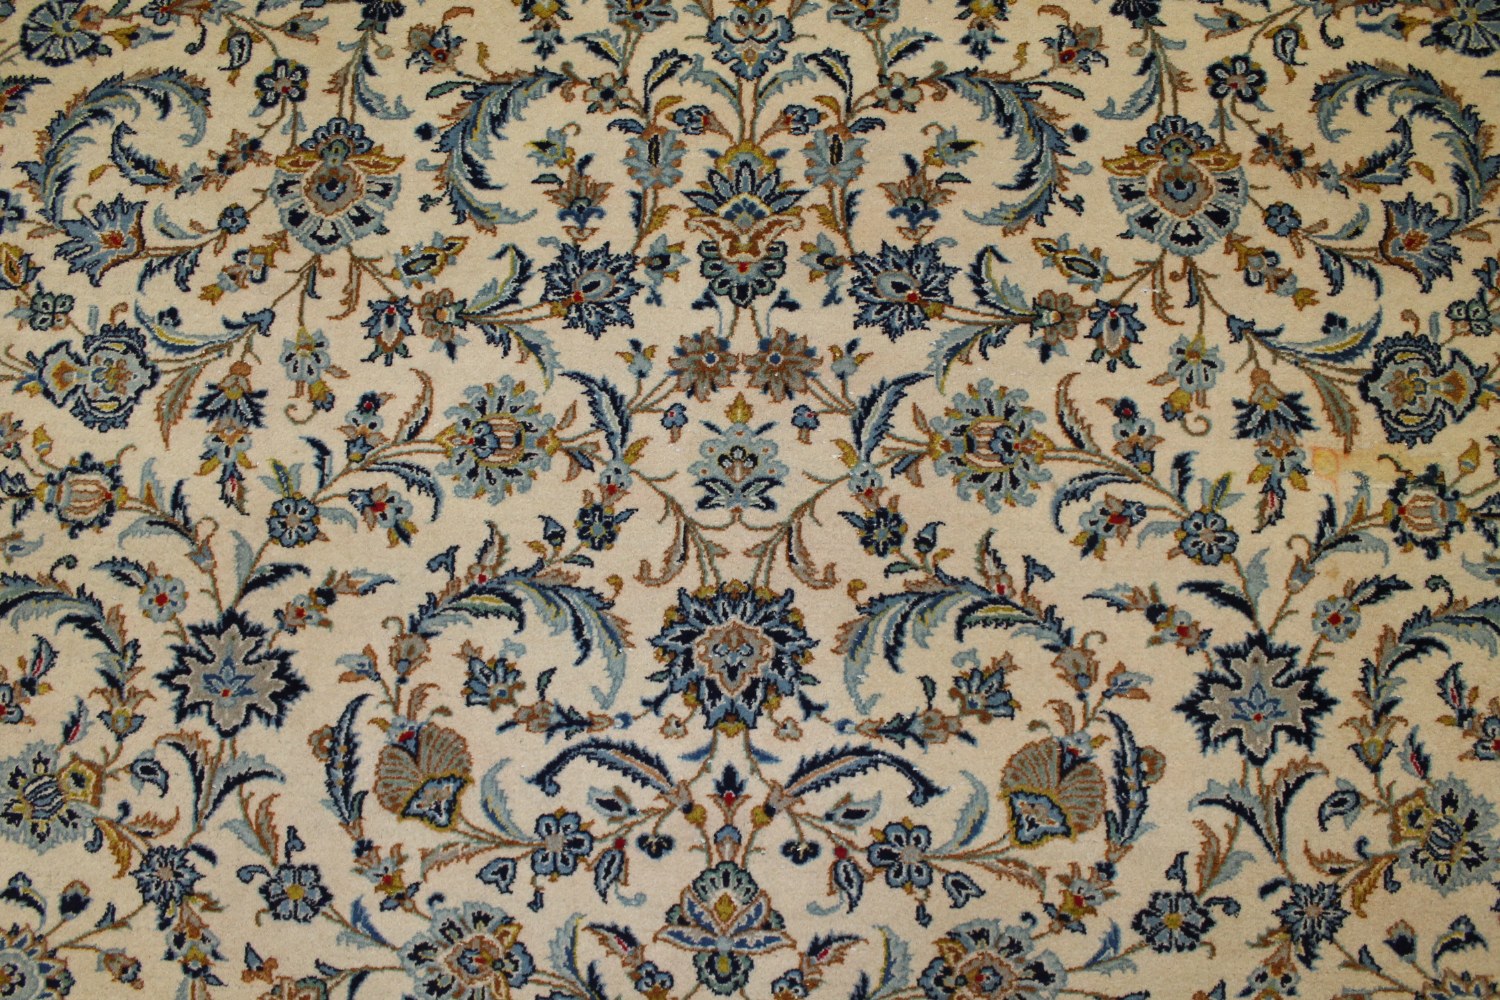 10x14 Floral Hand Knotted Wool Area Rug - MR023154